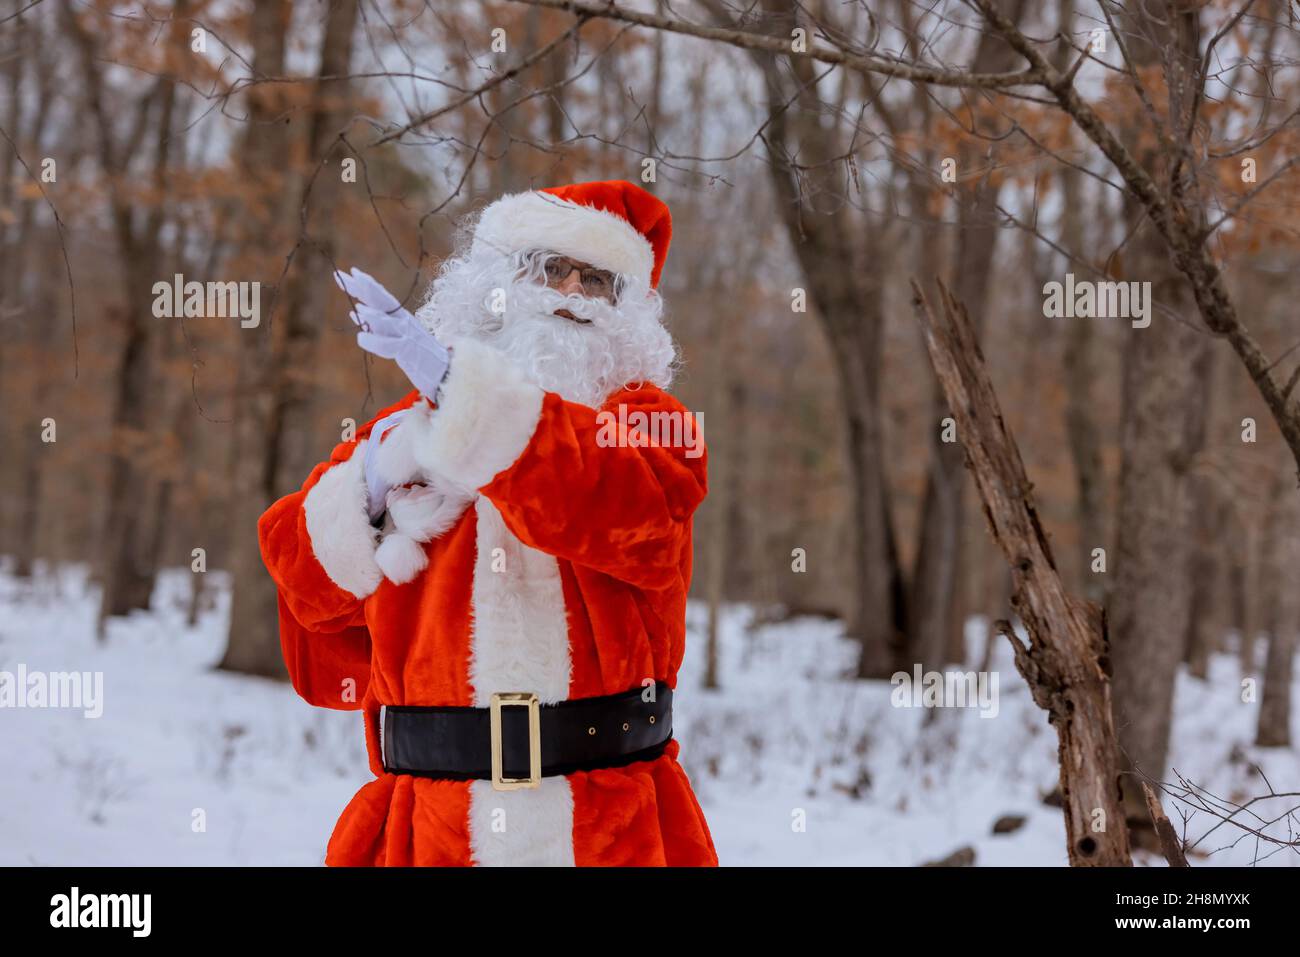 Santa Claus walking a forest tree holding in a red bag gifts for children for Christmas Stock Photo